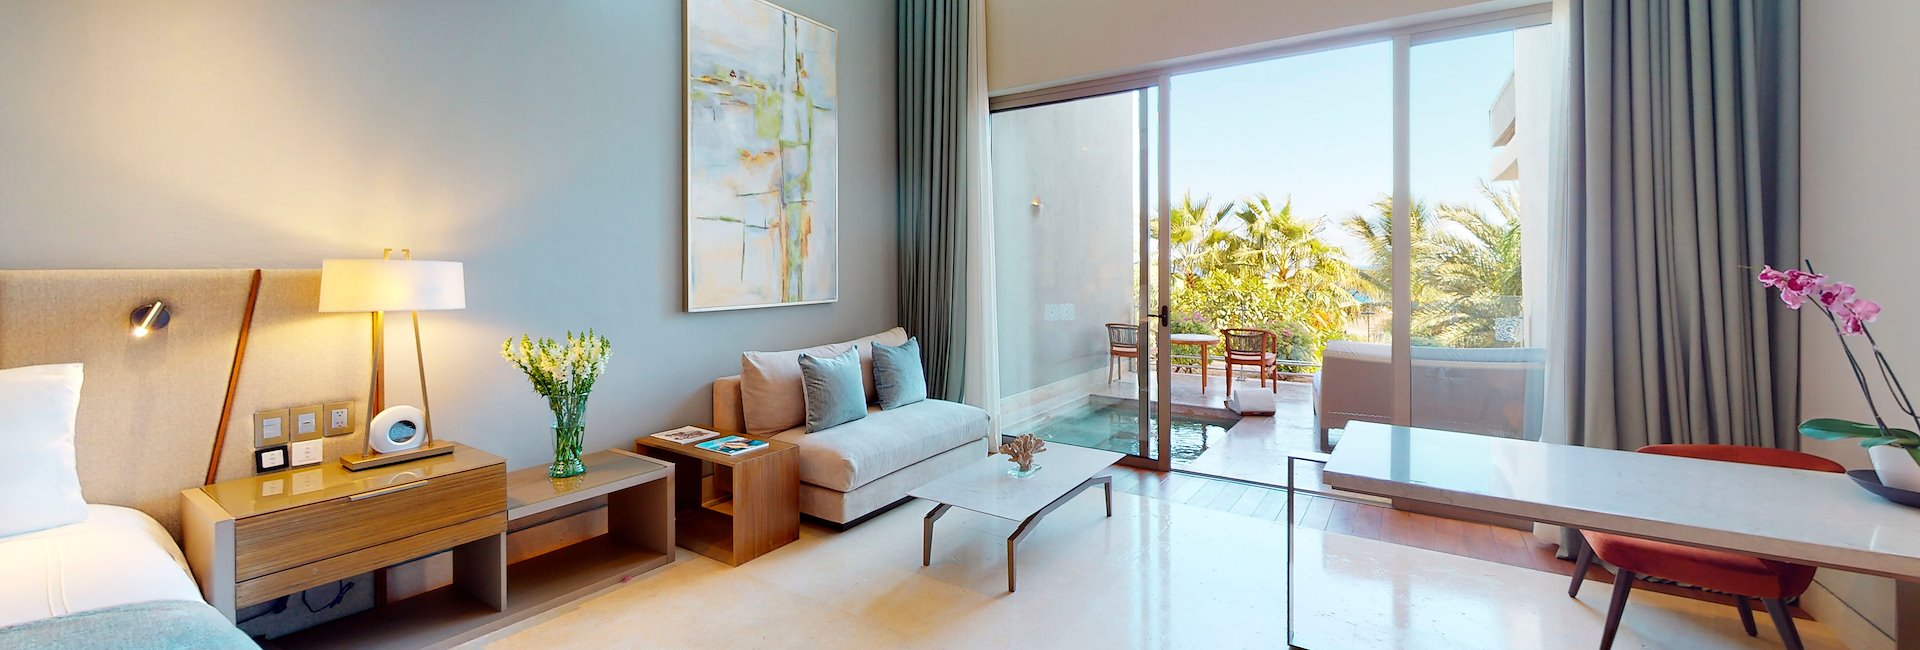 Wellness Suite Ocean View - Adults Only at Grand Velas Los Cabos, Mexico